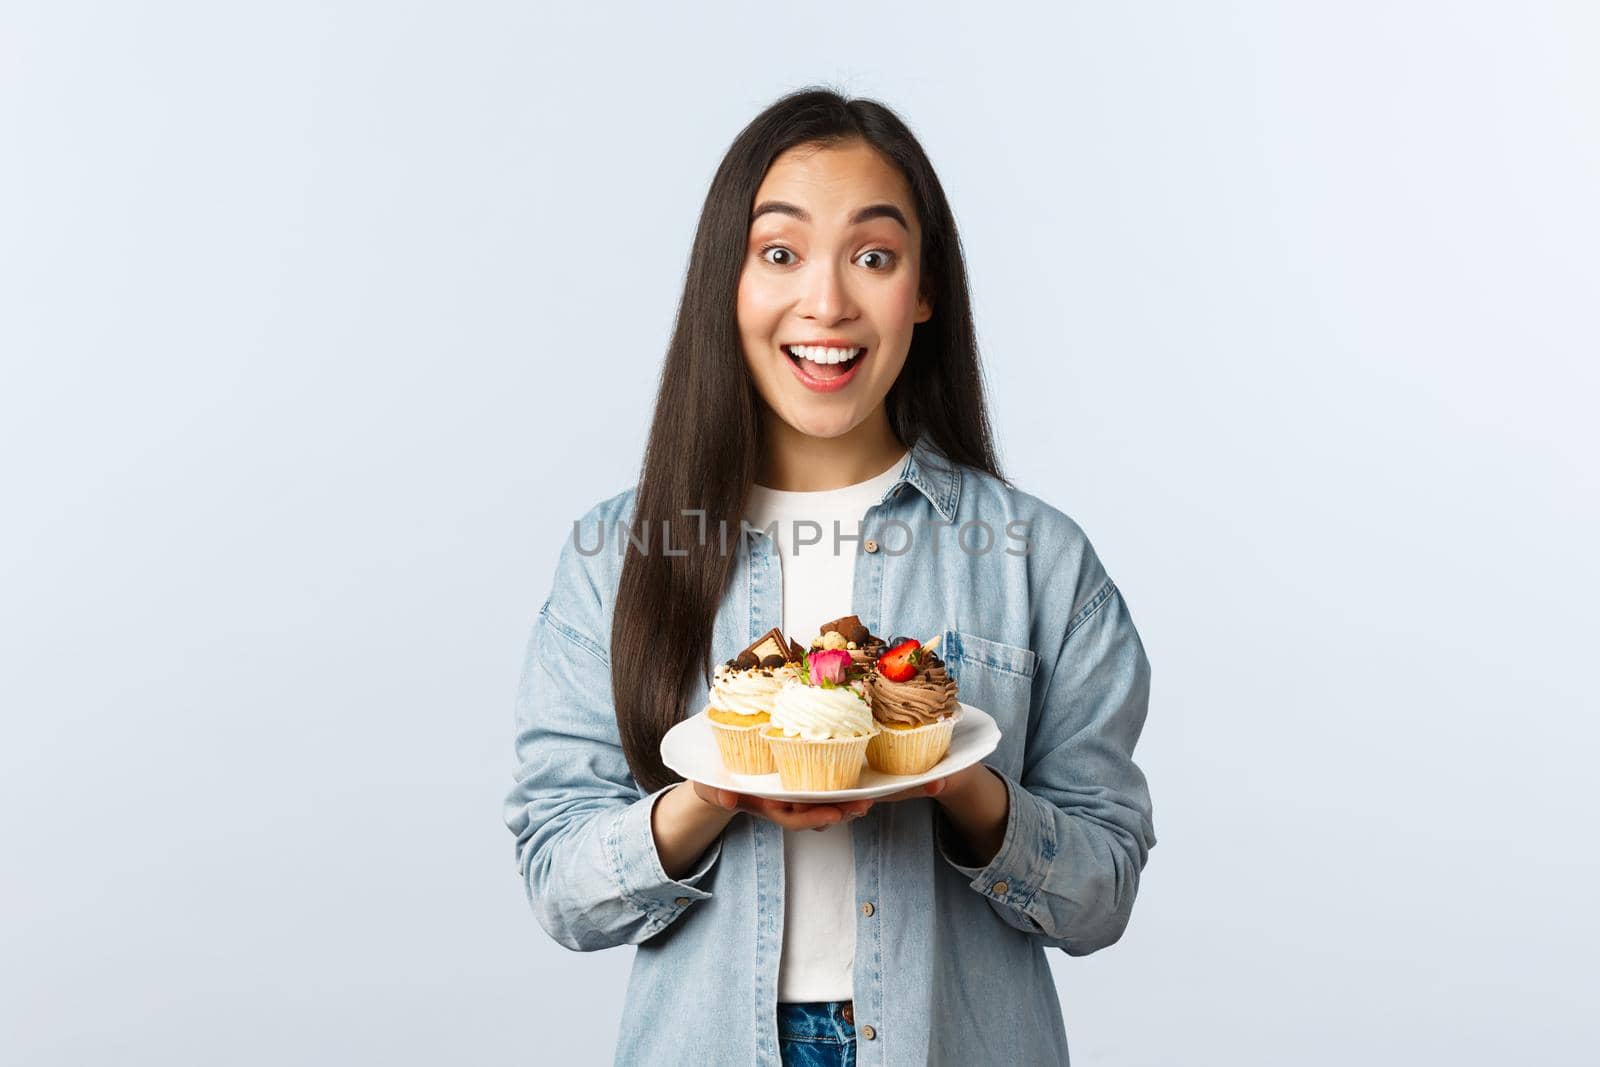 Social distancing lifestyle, covid-19 pandemic, celebrating holidays during coronavirus concept. Excited asian girl holding plate with tasty cupcakes, smiling broadly, invite visit cafe with muffins.